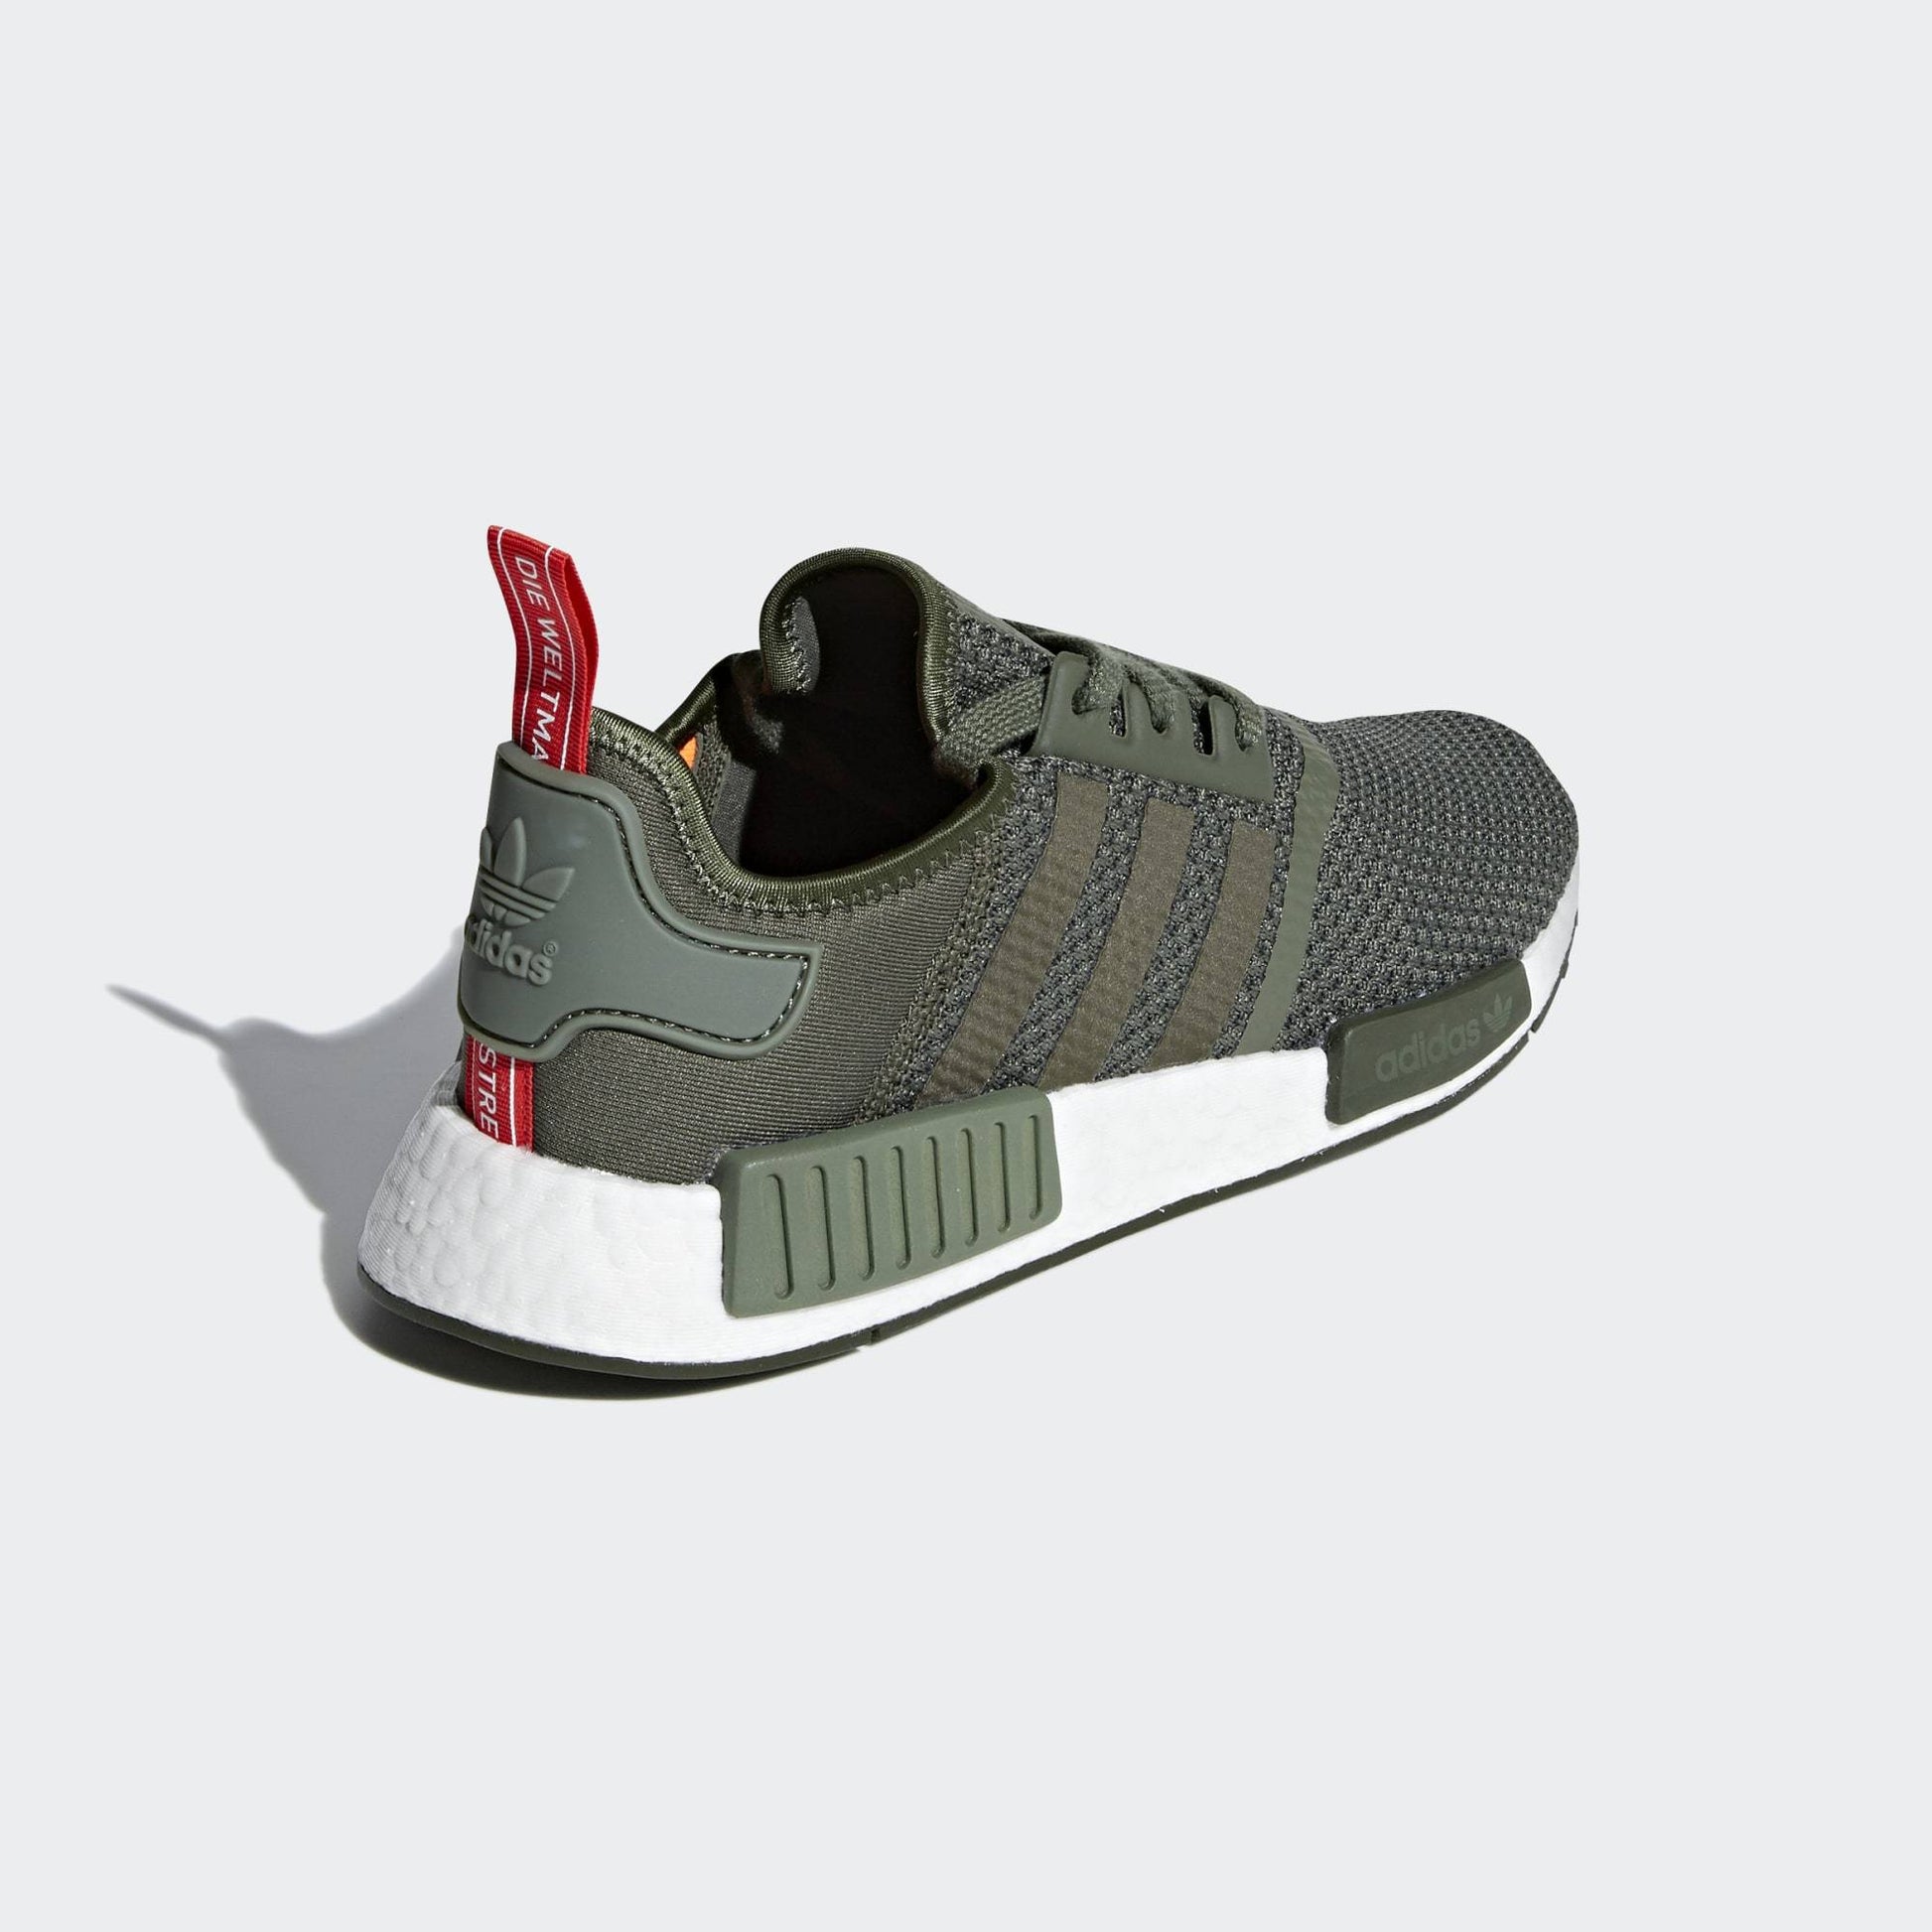 NMD_R1 SHOES - Discount Store